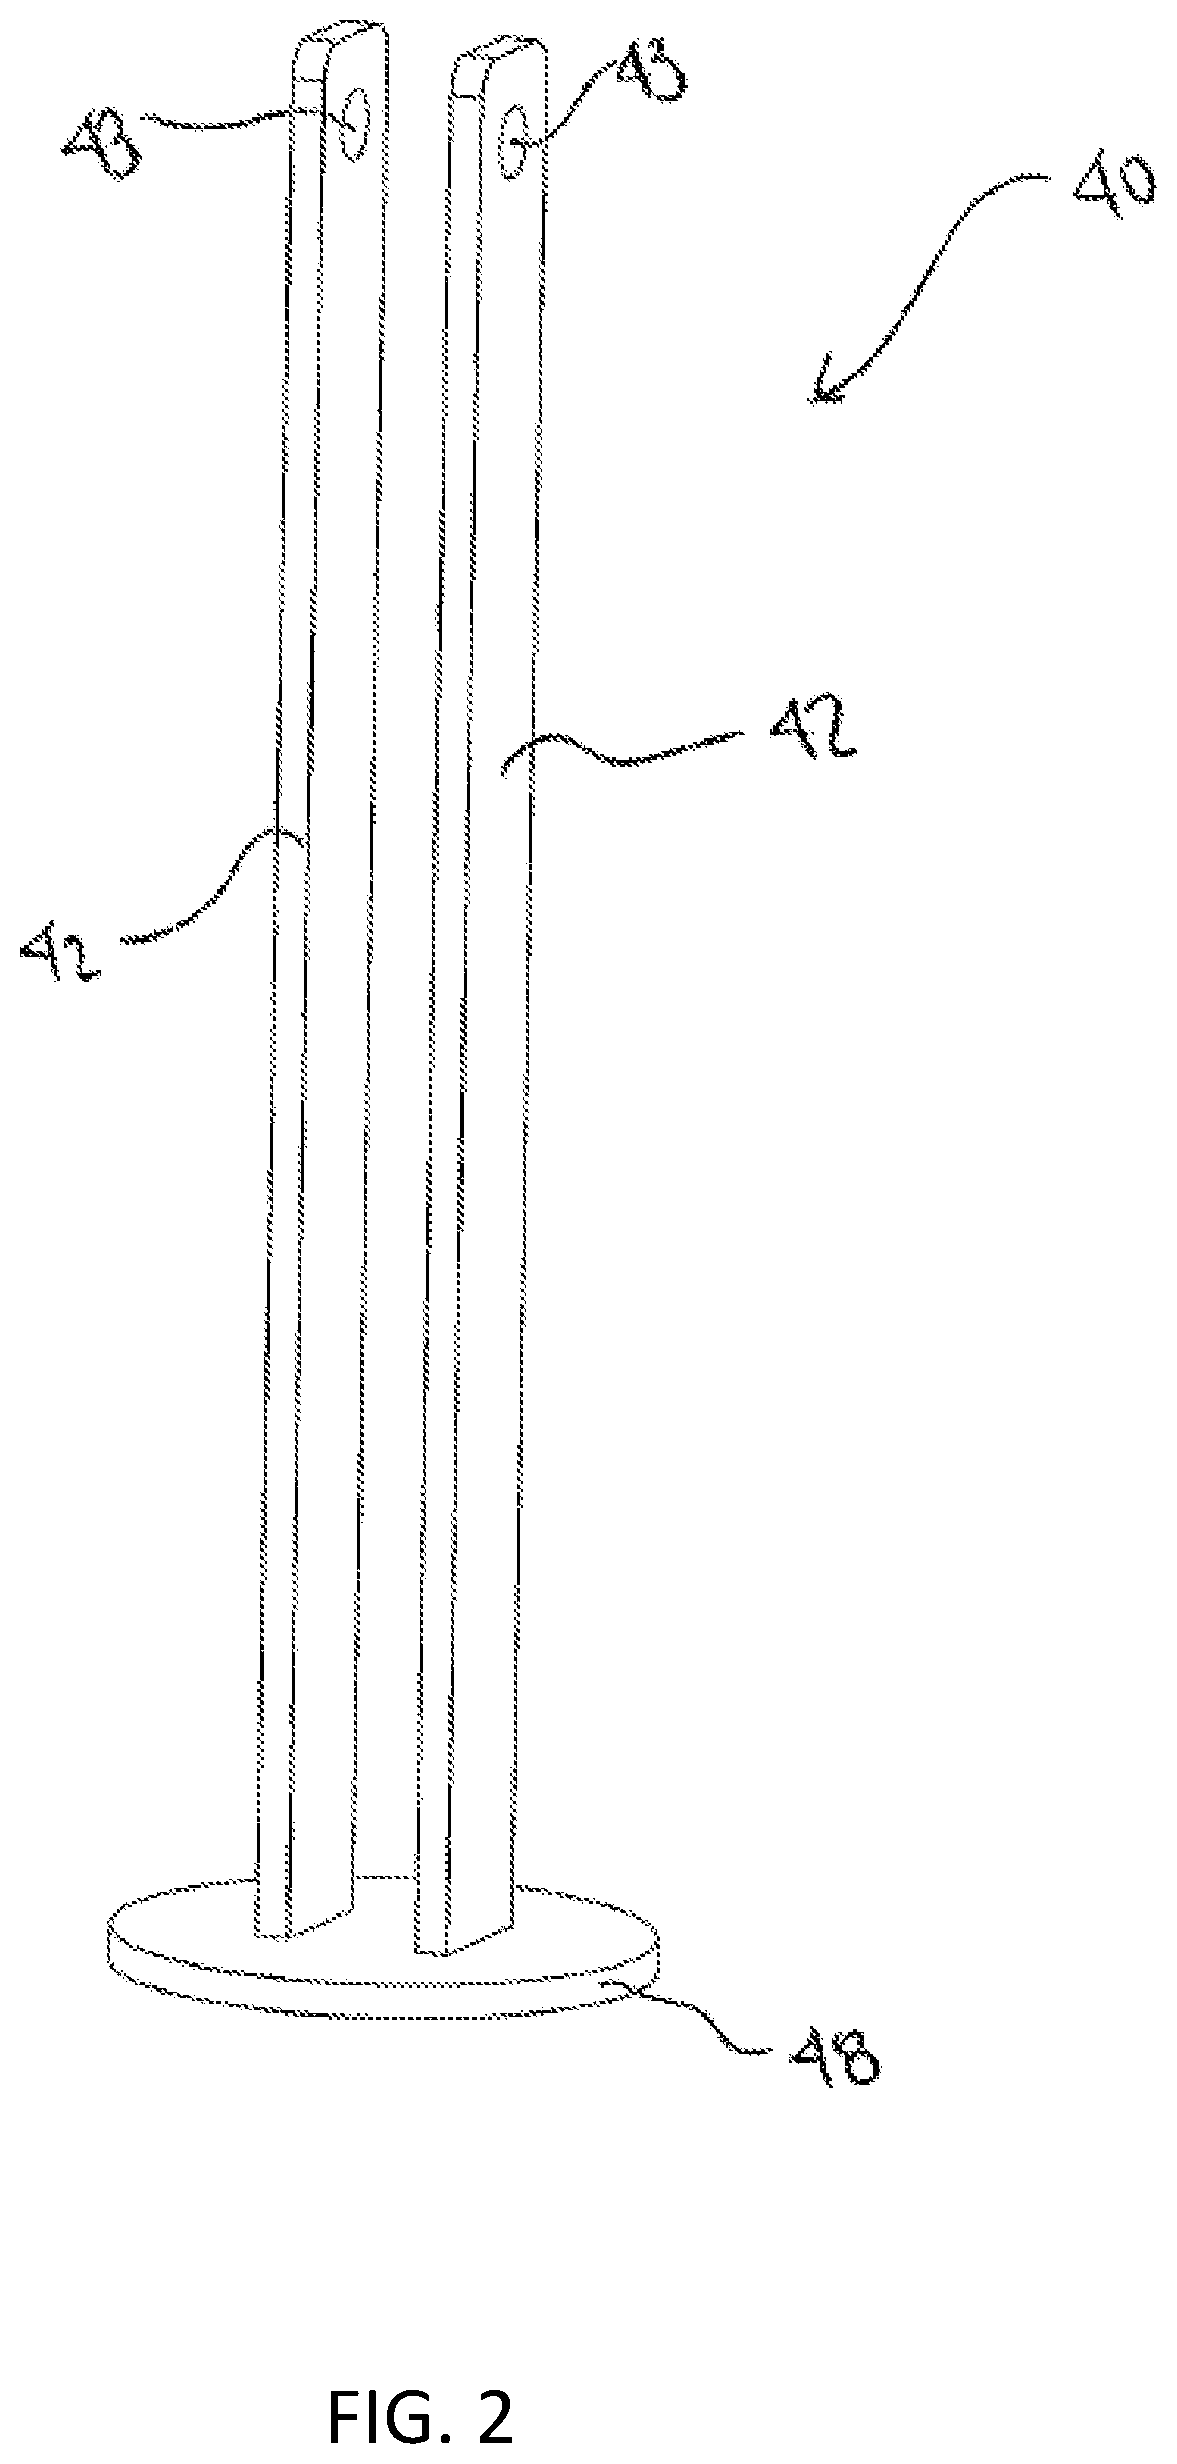 Extrusion seal devices and methods